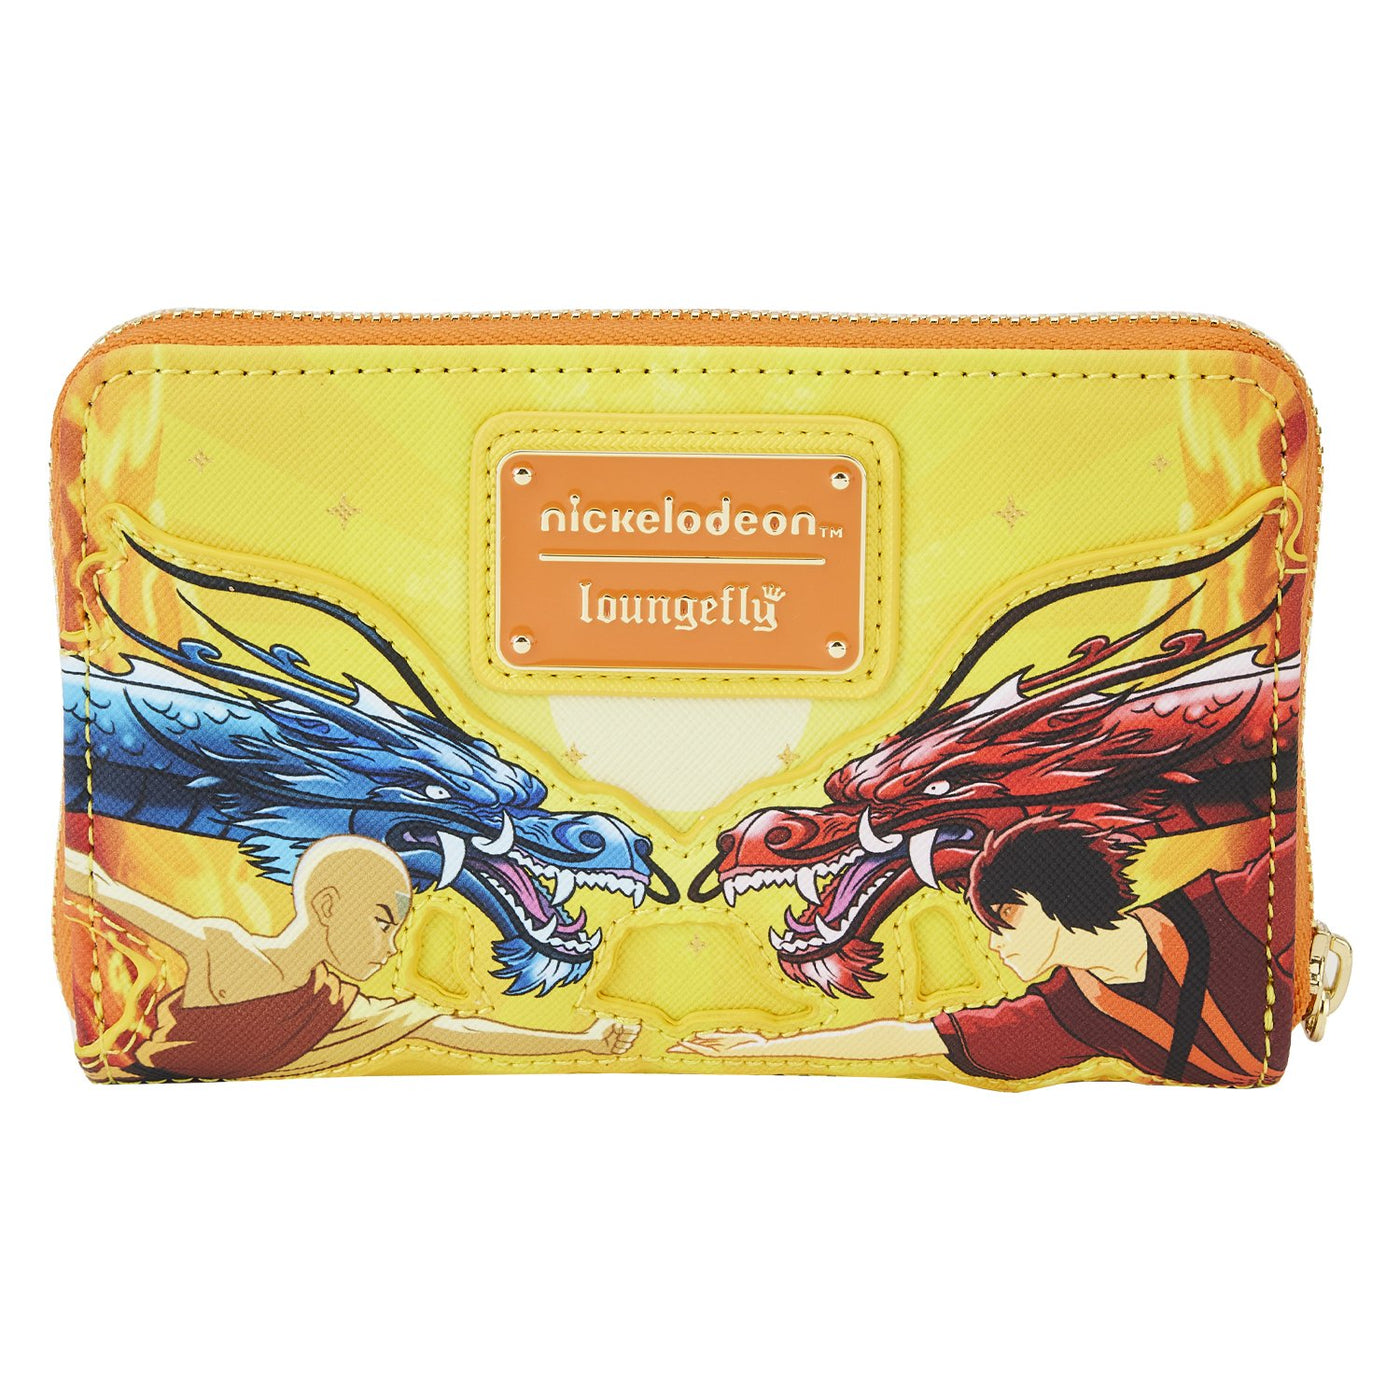 671803395206 - Loungefly Nickelodeon Avatar The Last Airbender The Fire Dance Zip-Around Wallet - Back